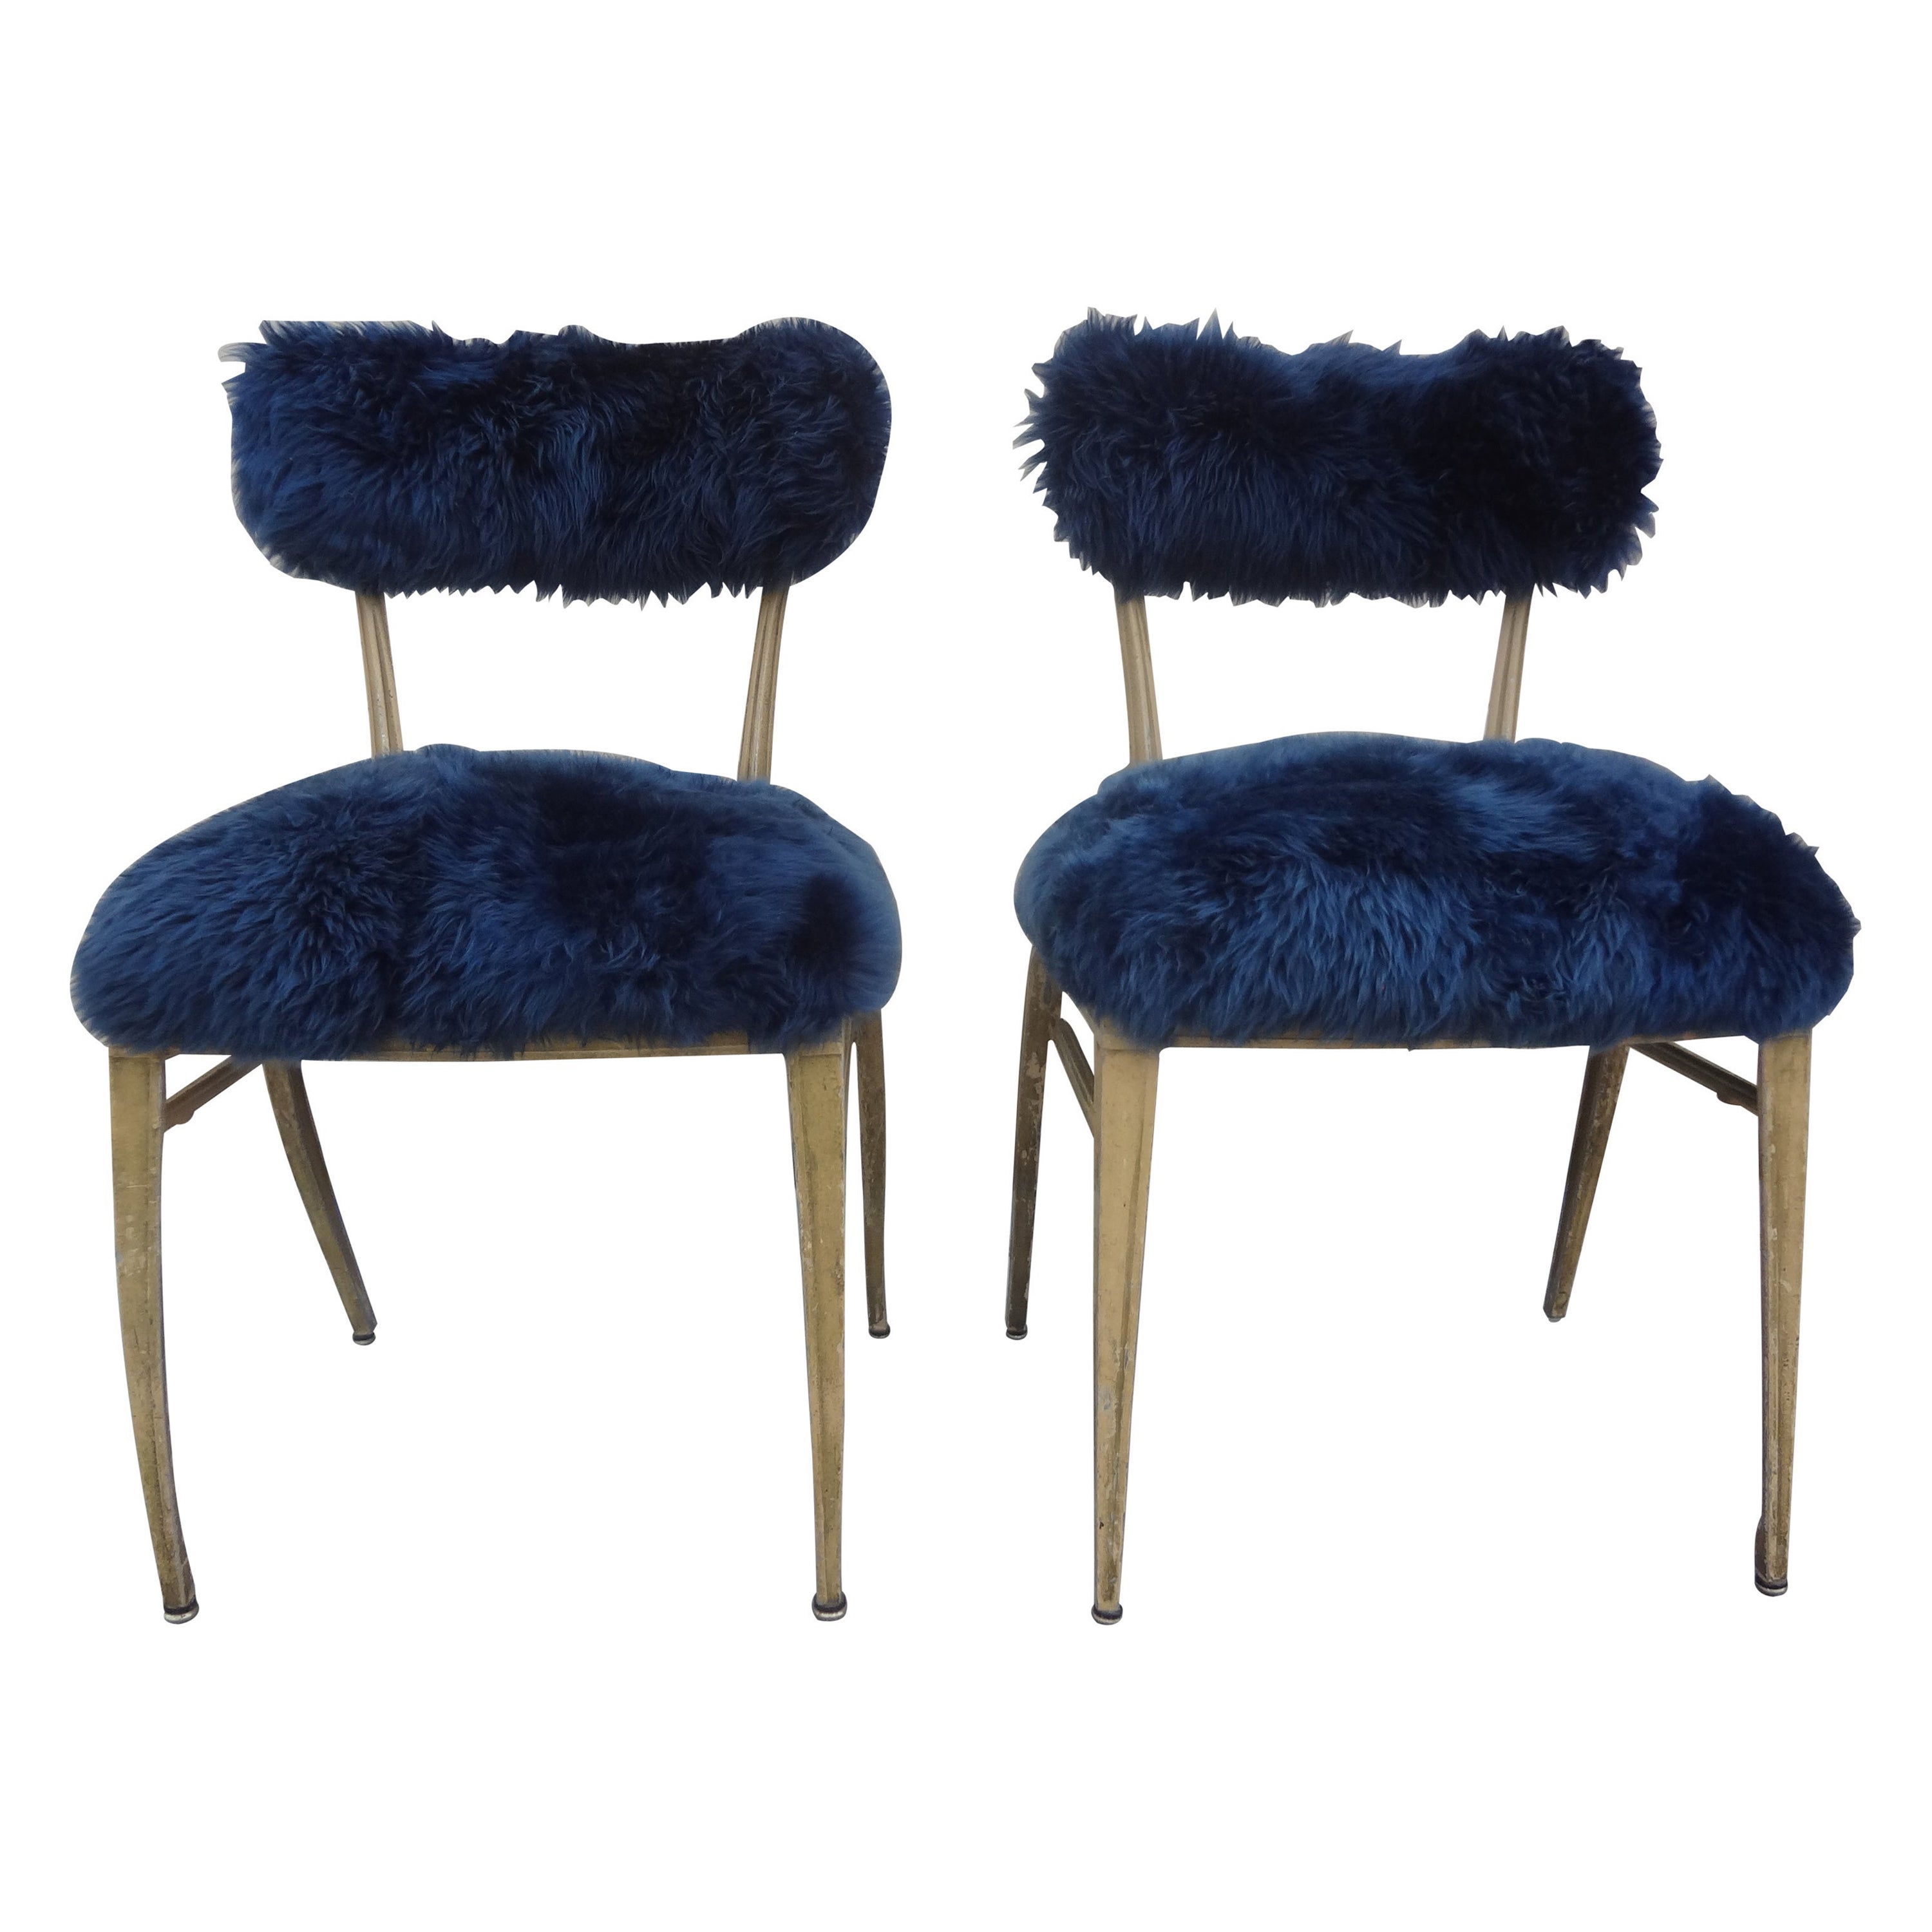 Pair of French Modern Jean Prouvé style metal chairs upholstered in blue sheepskin. These French midcentury chairs or side chairs have a great distressed painted finish and are the perfect addition to your Modernist interior!.